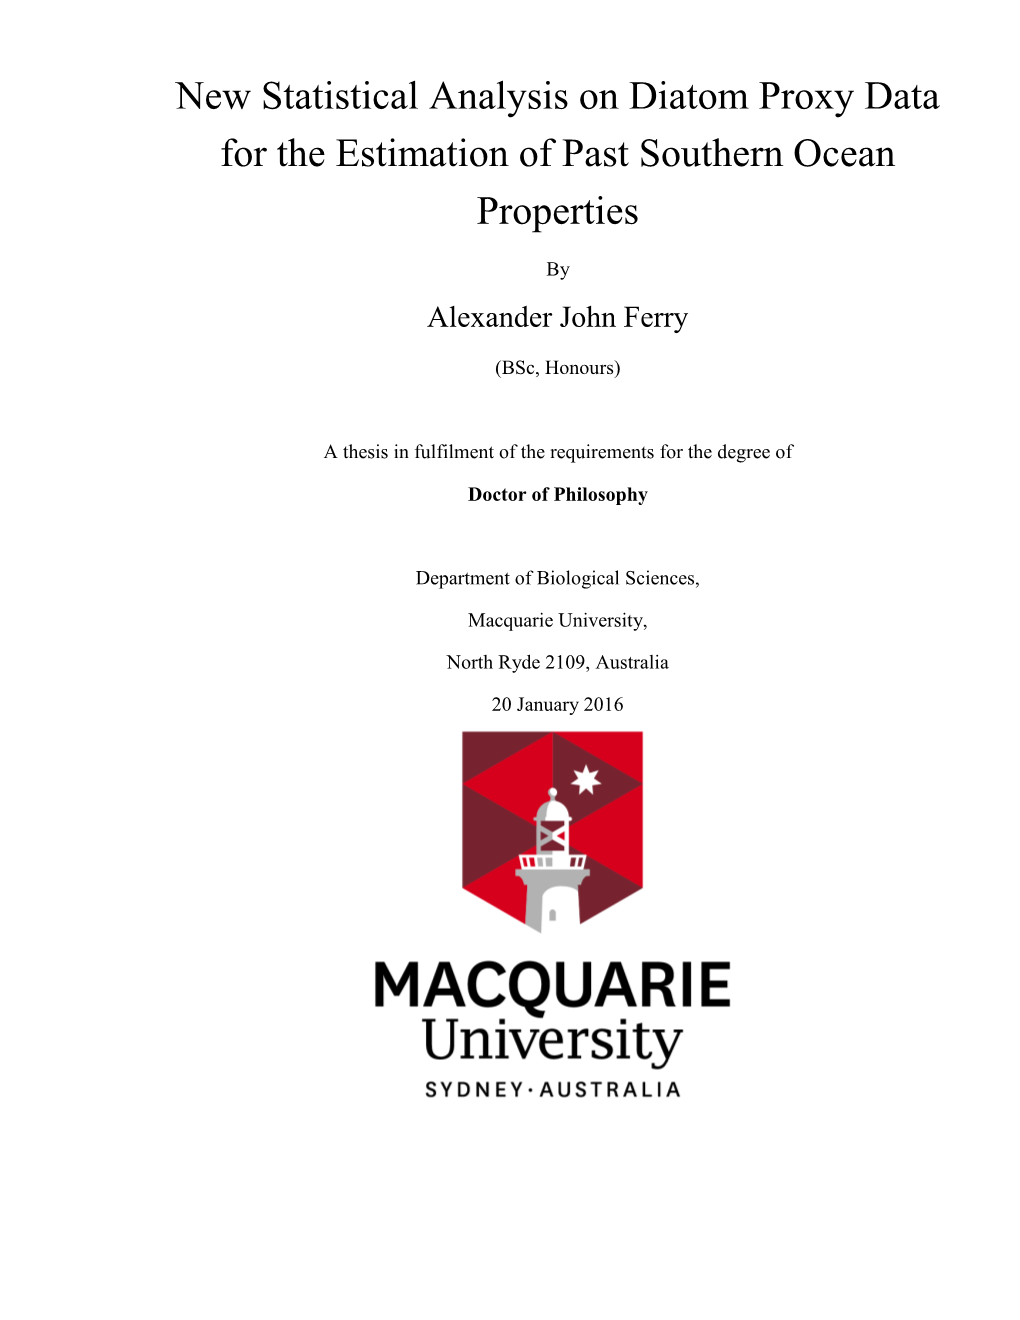 New Statistical Analysis on Diatom Proxy Data for the Estimation of Past Southern Ocean Properties